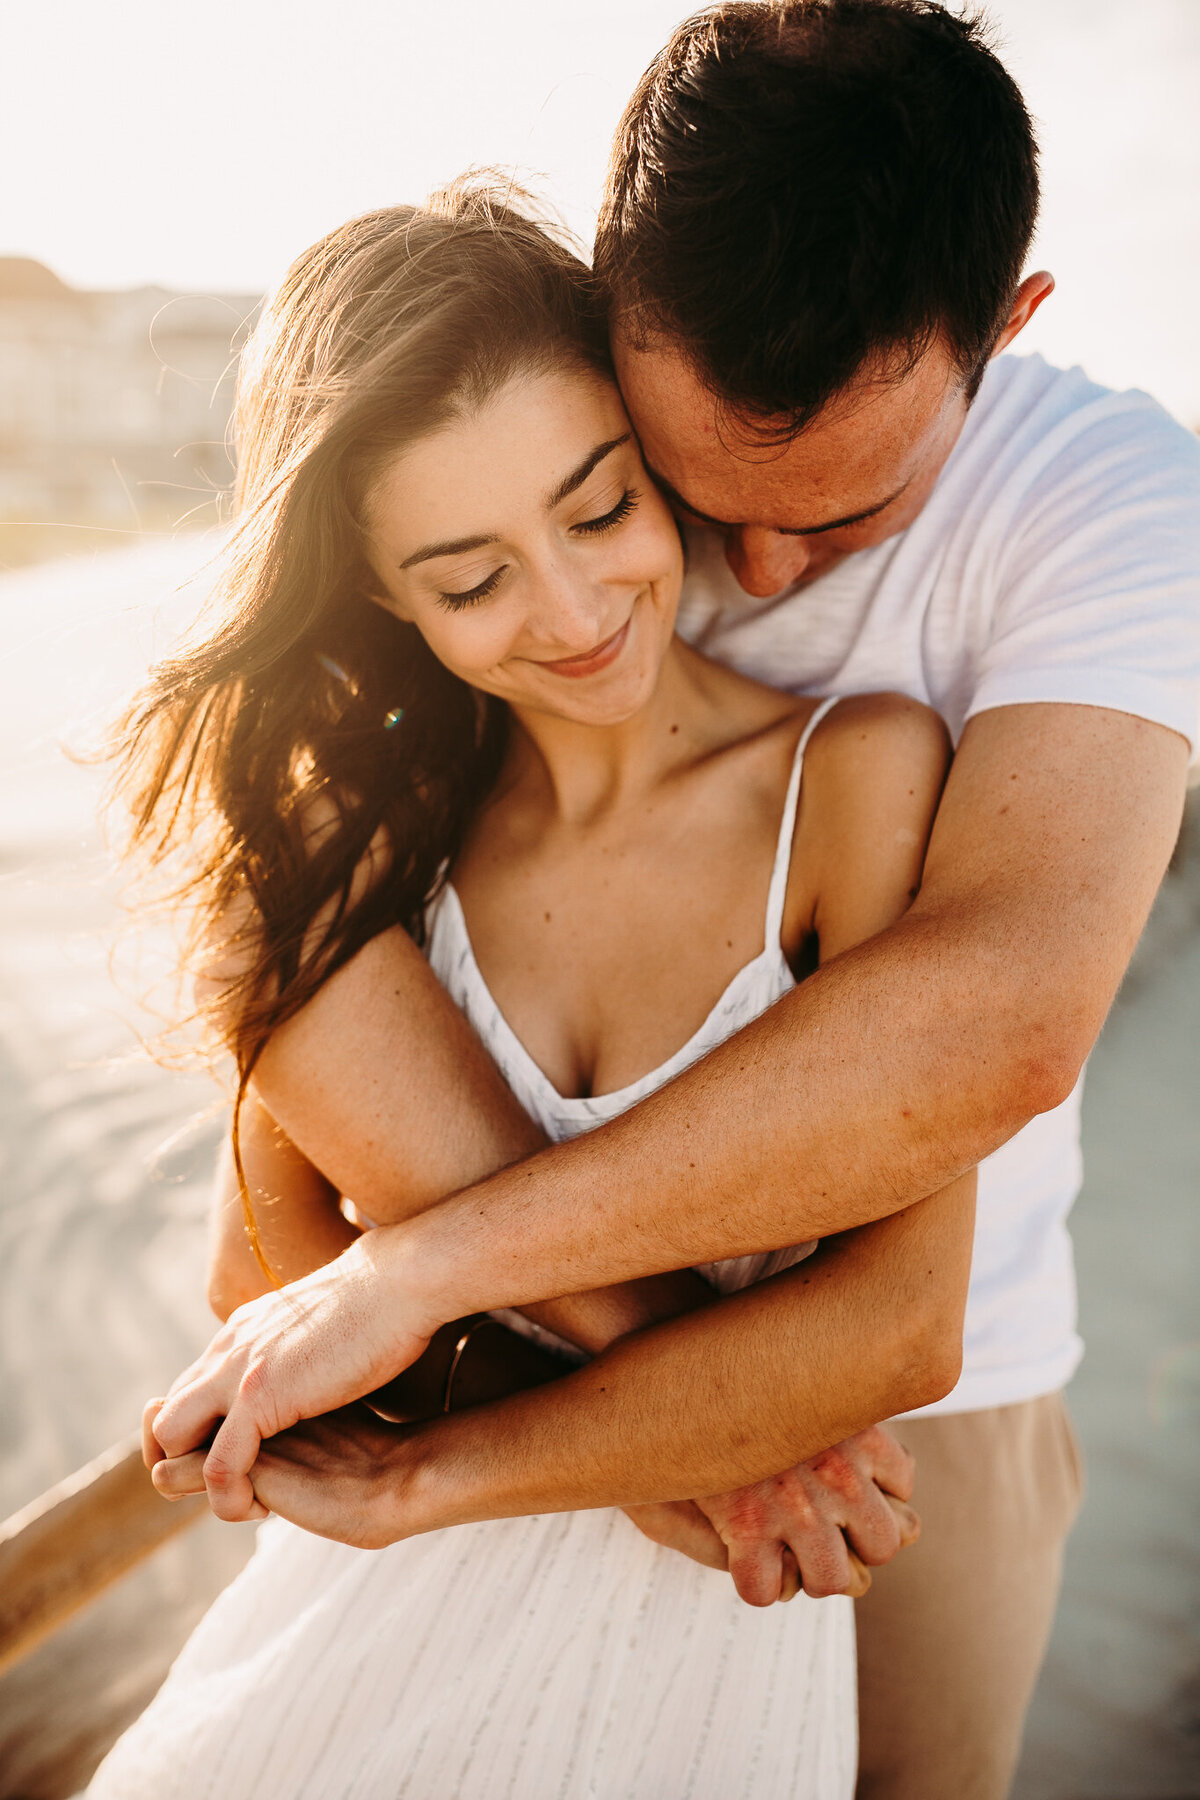 stone-harbor-engagement-photos-new-jersey-rebecca-renner-photography-10